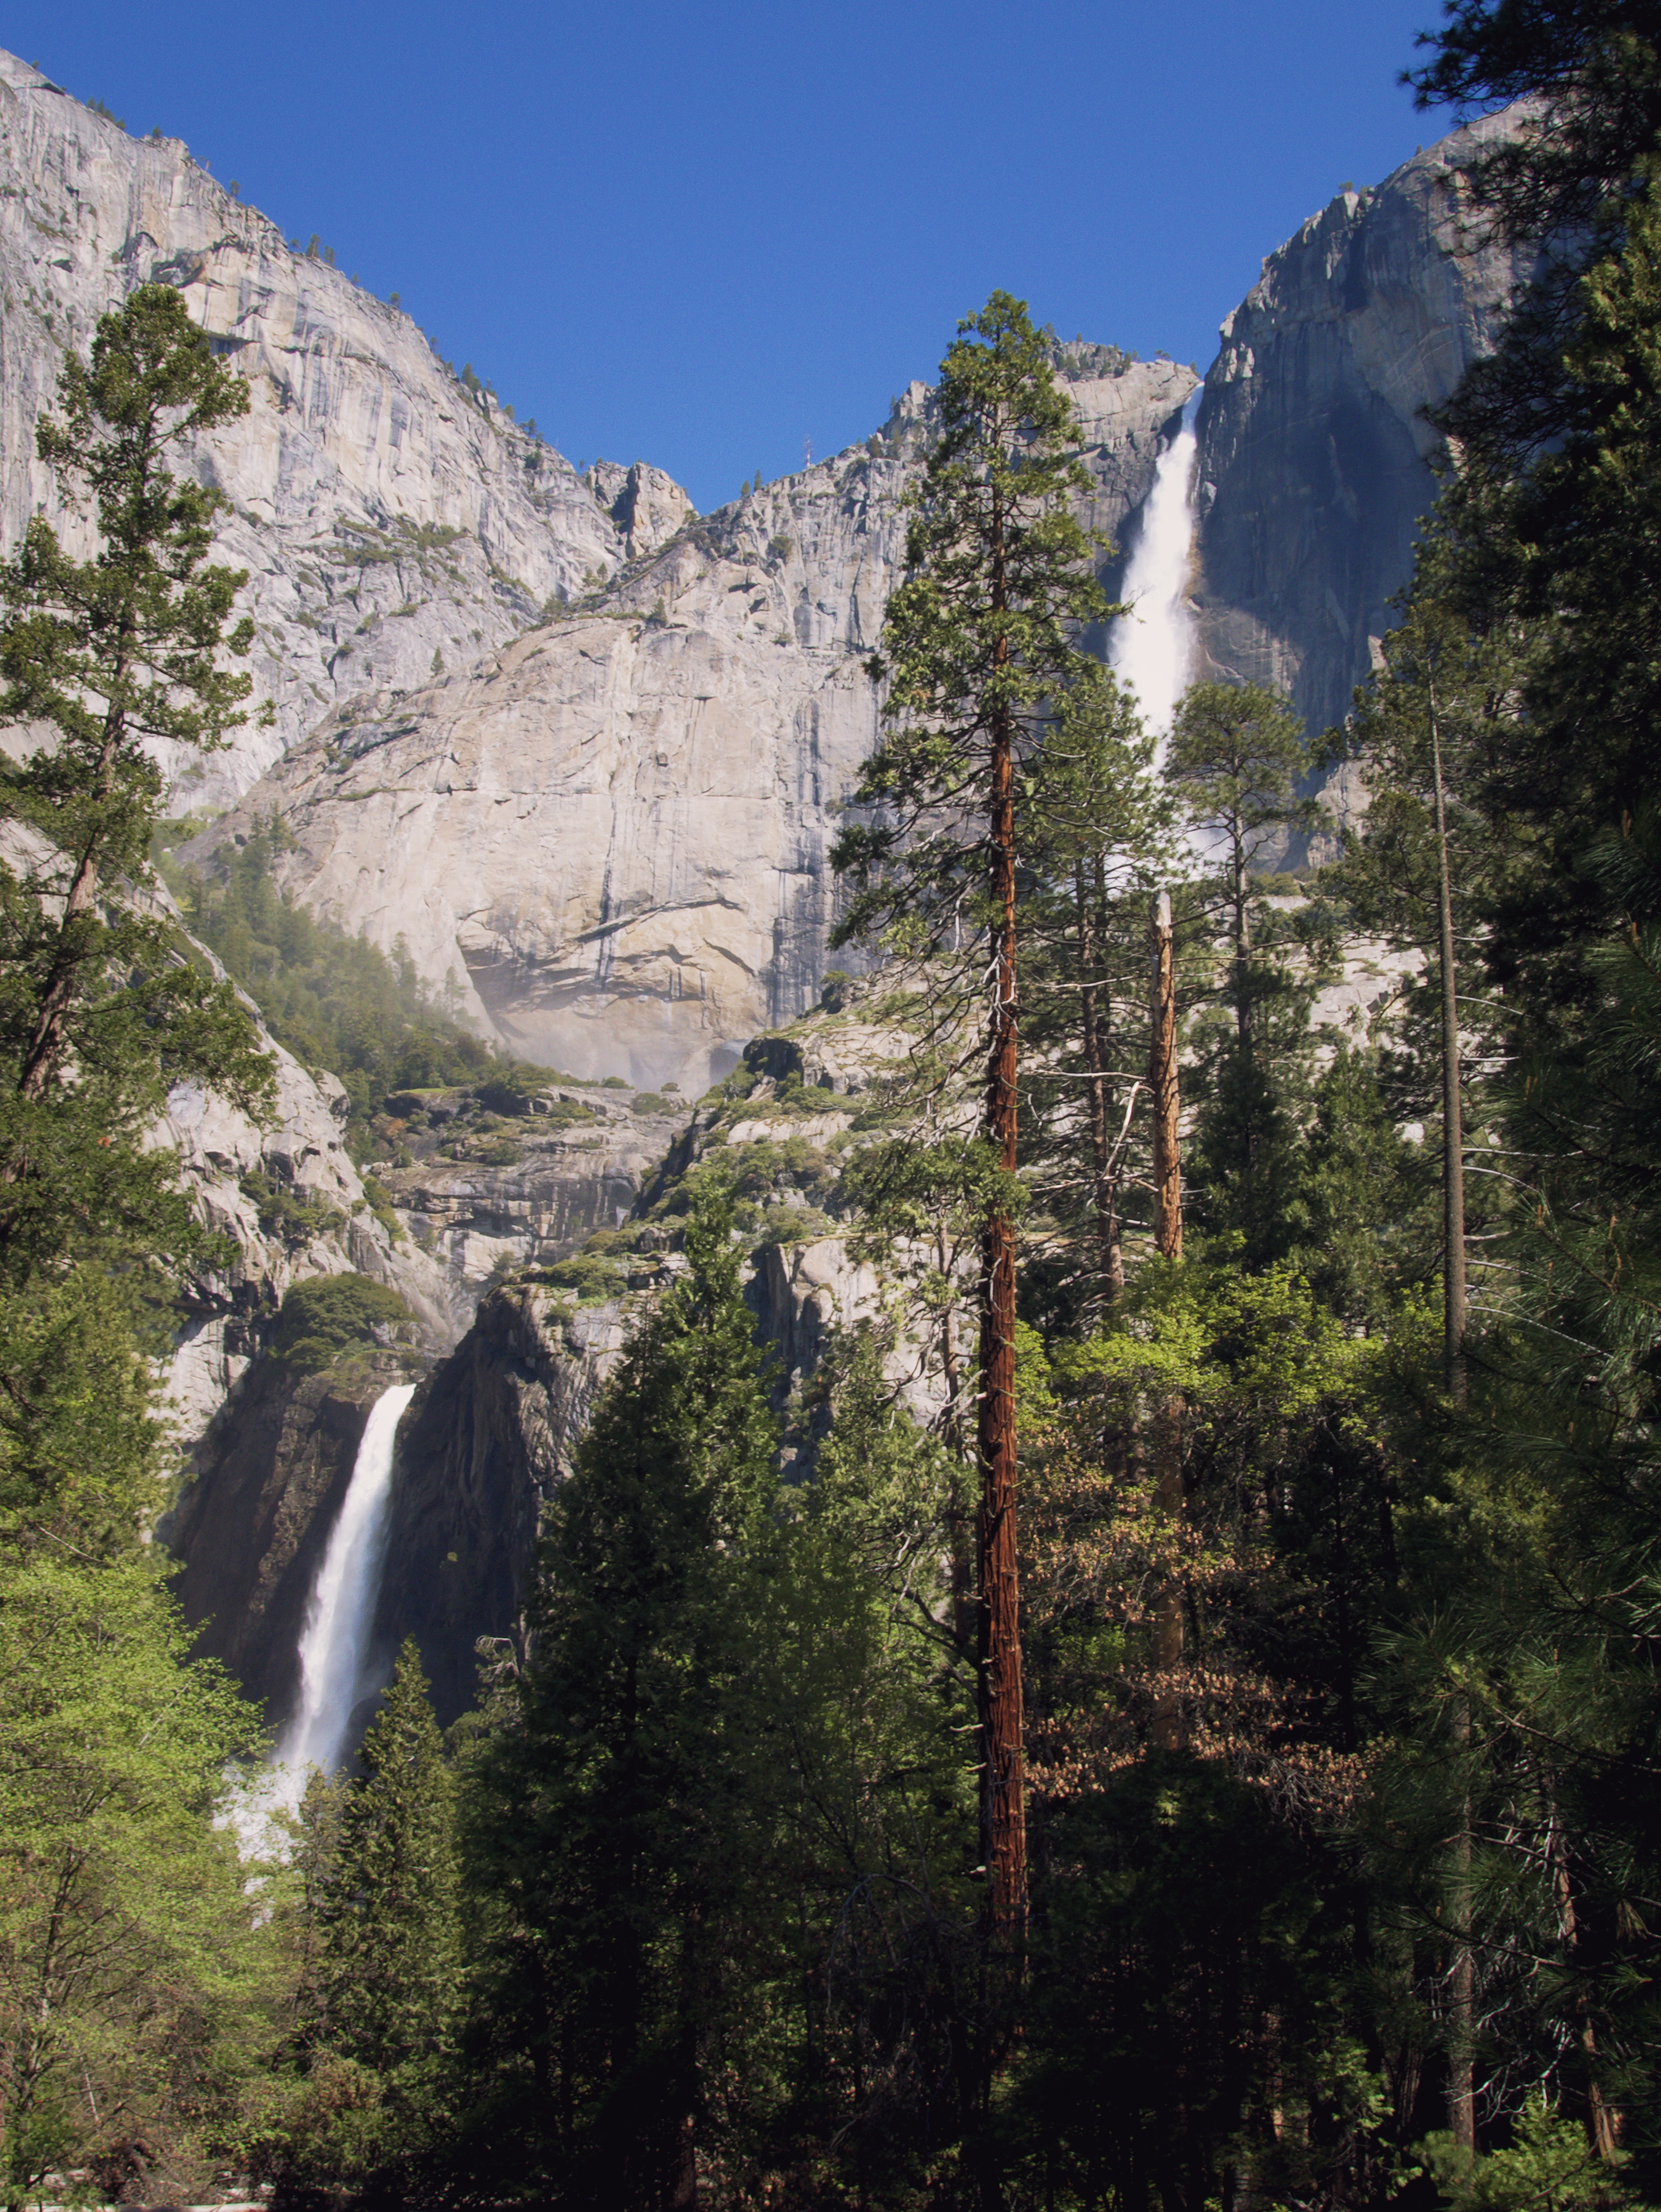 View of both the upper and lower Yosemite Falls